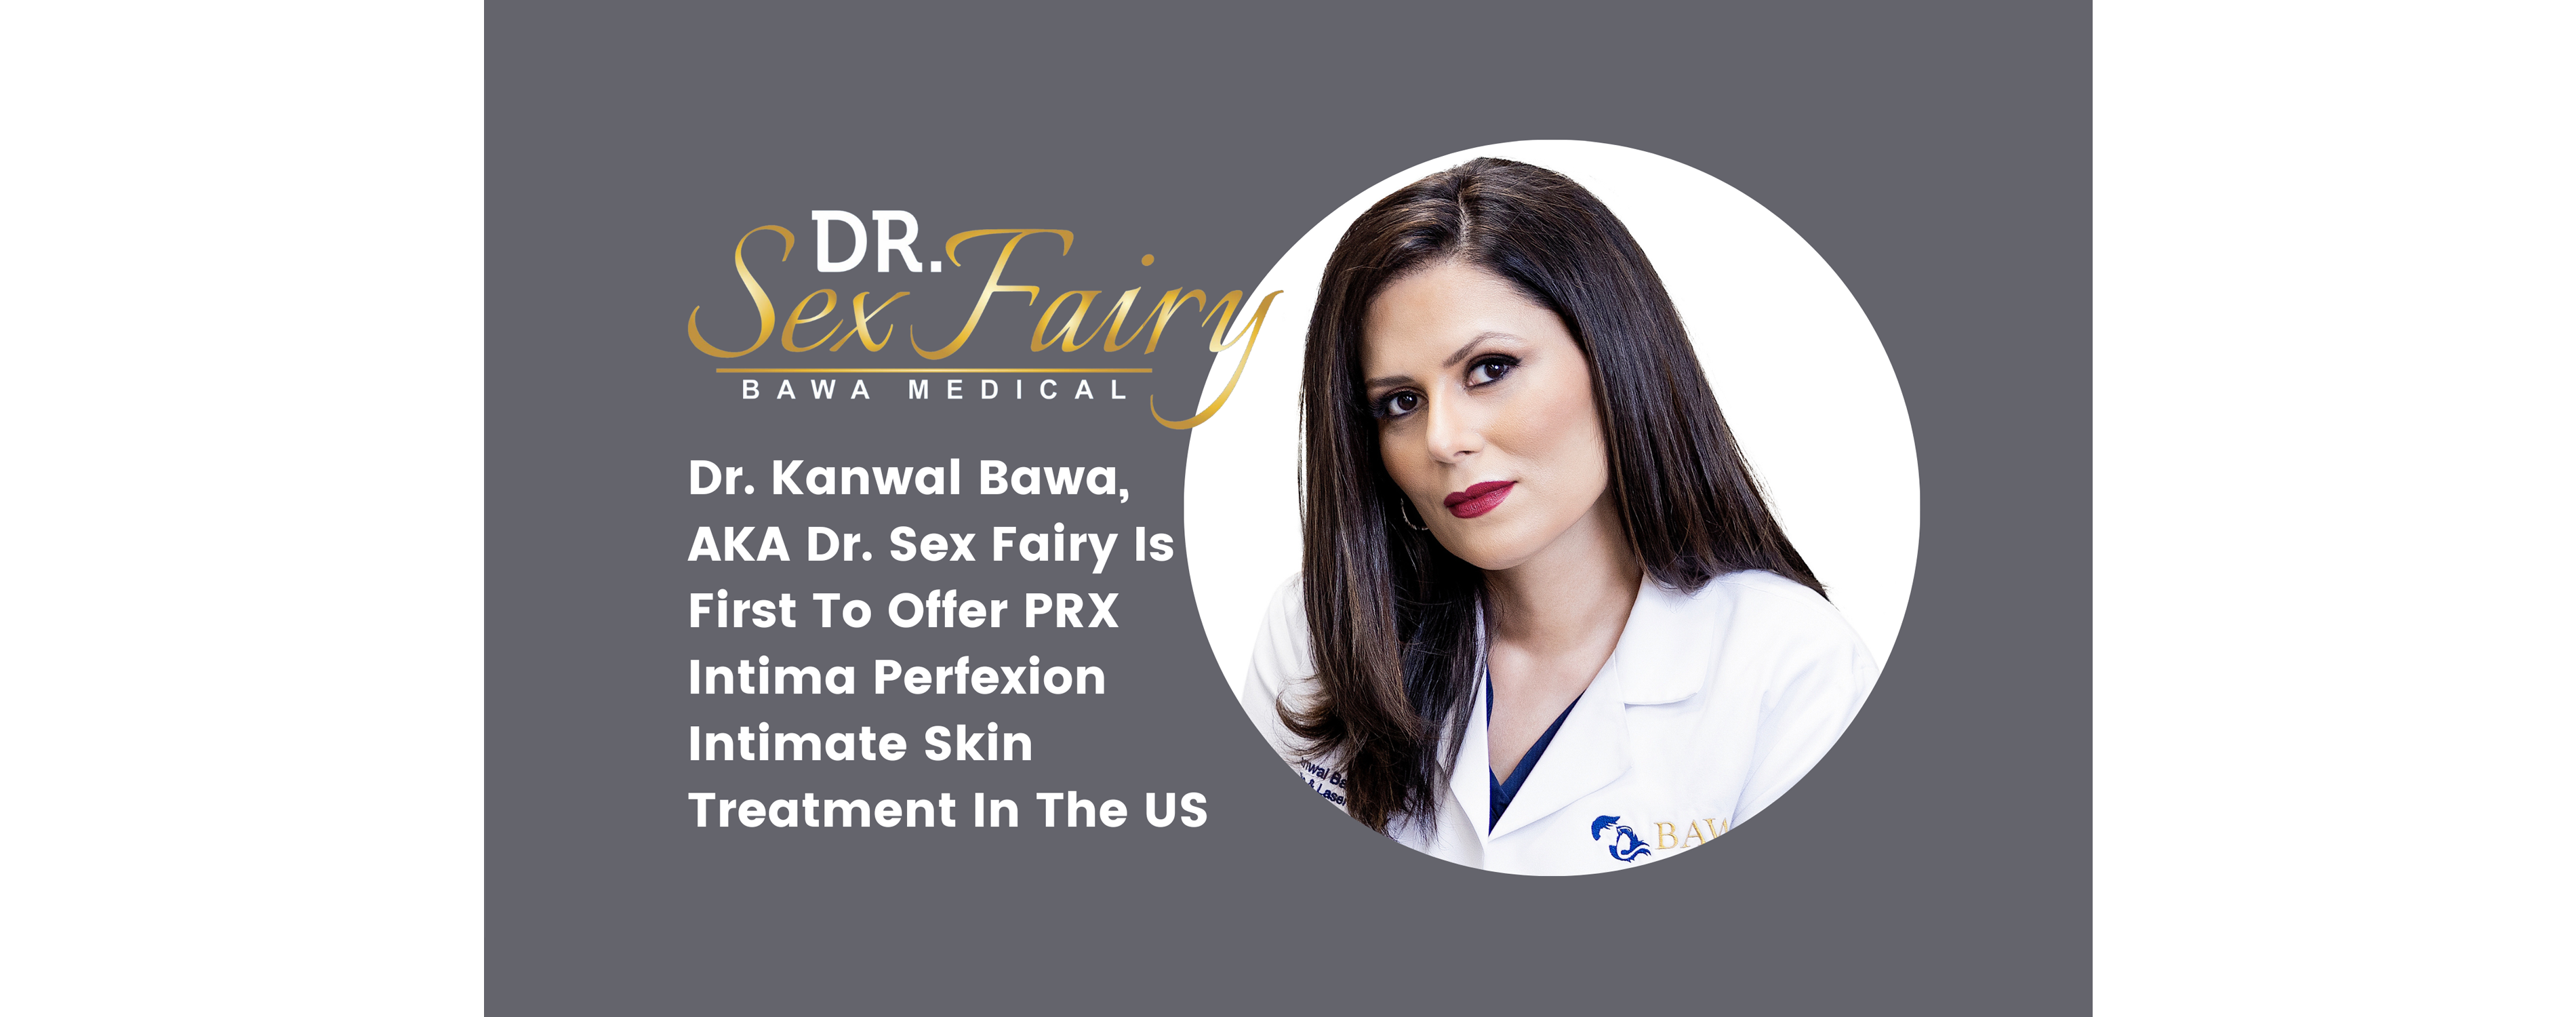 Press Release: Dr. Kanwal Bawa, AKA Dr. Sex Fairy Is First To Offer PRX Intima Perfexion Intimate Skin Treatment In The US